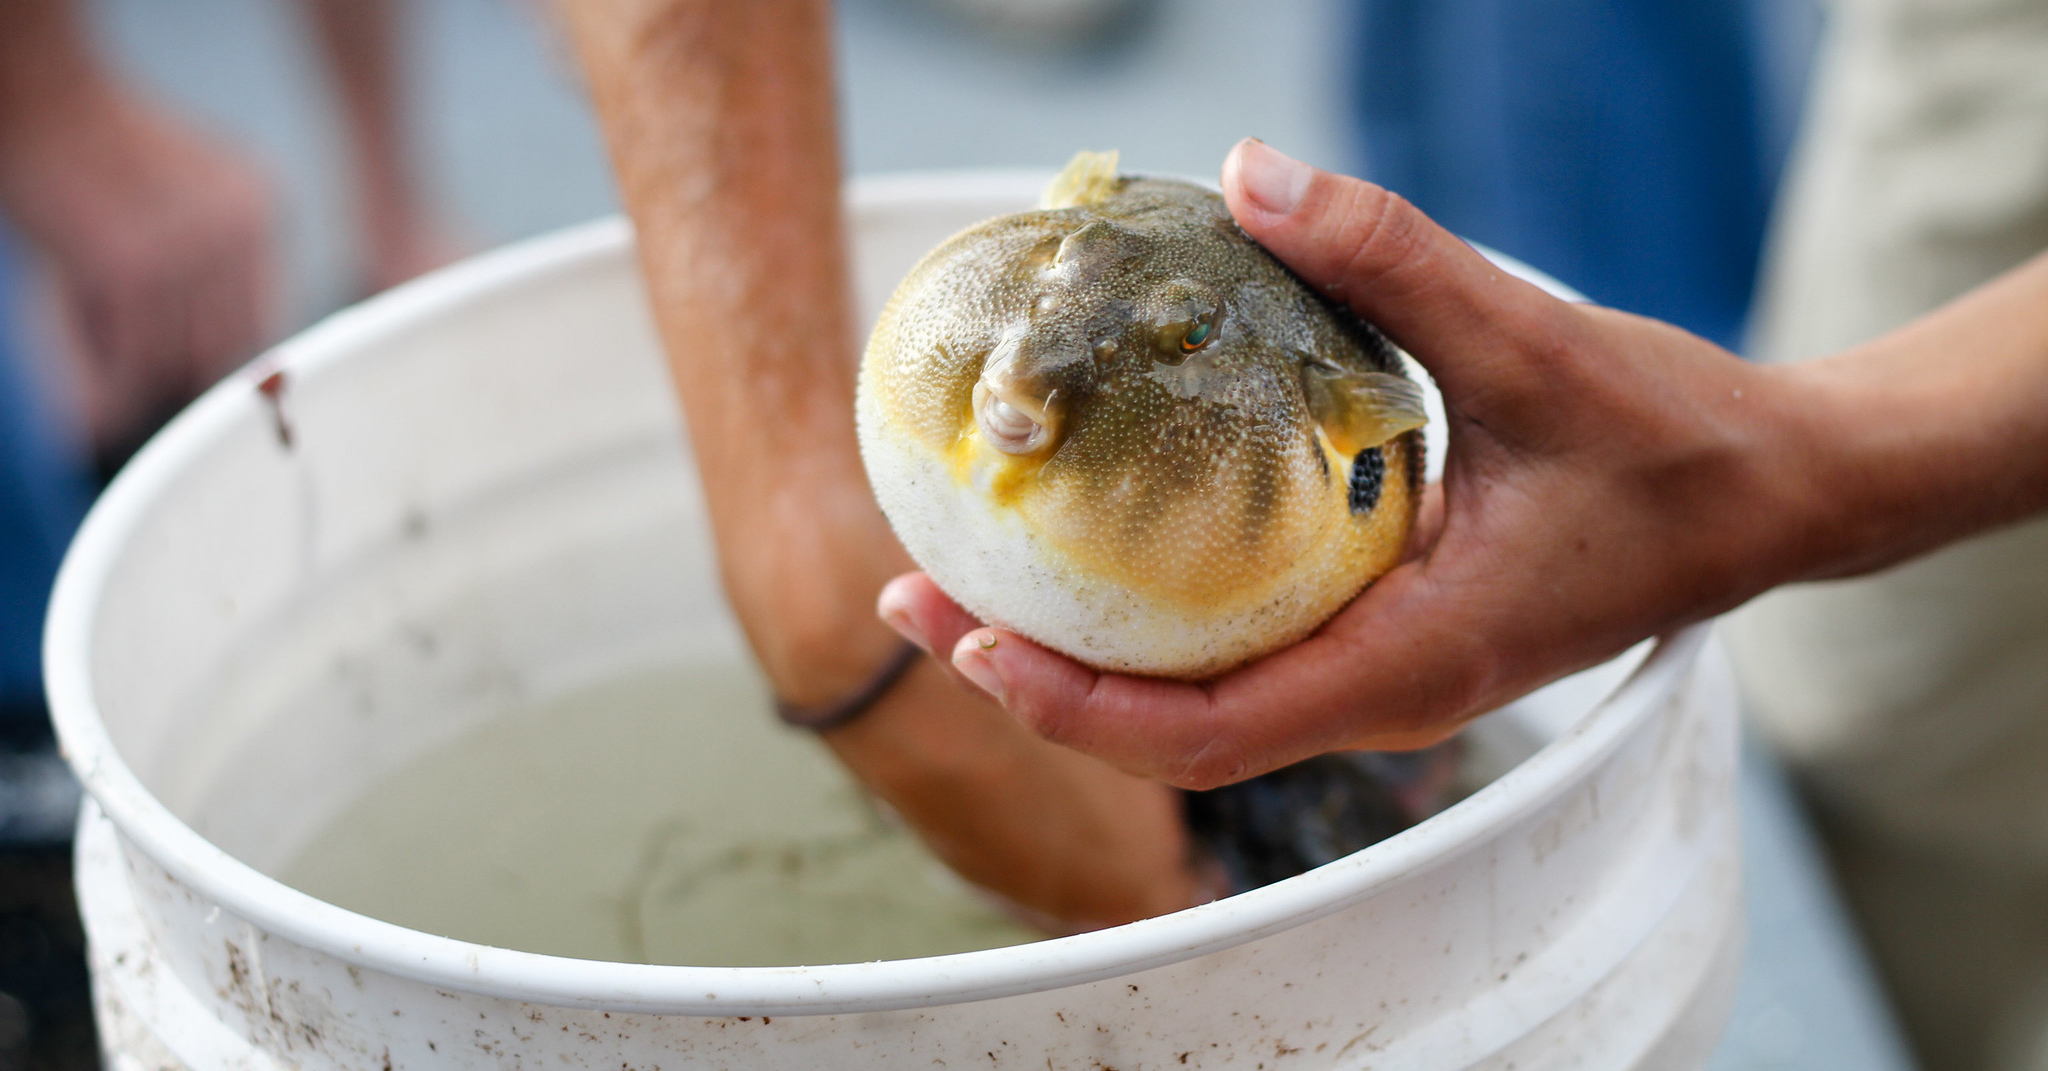 Toxic Pufferfish Are Invading Rhode Island, Where Anglers Target